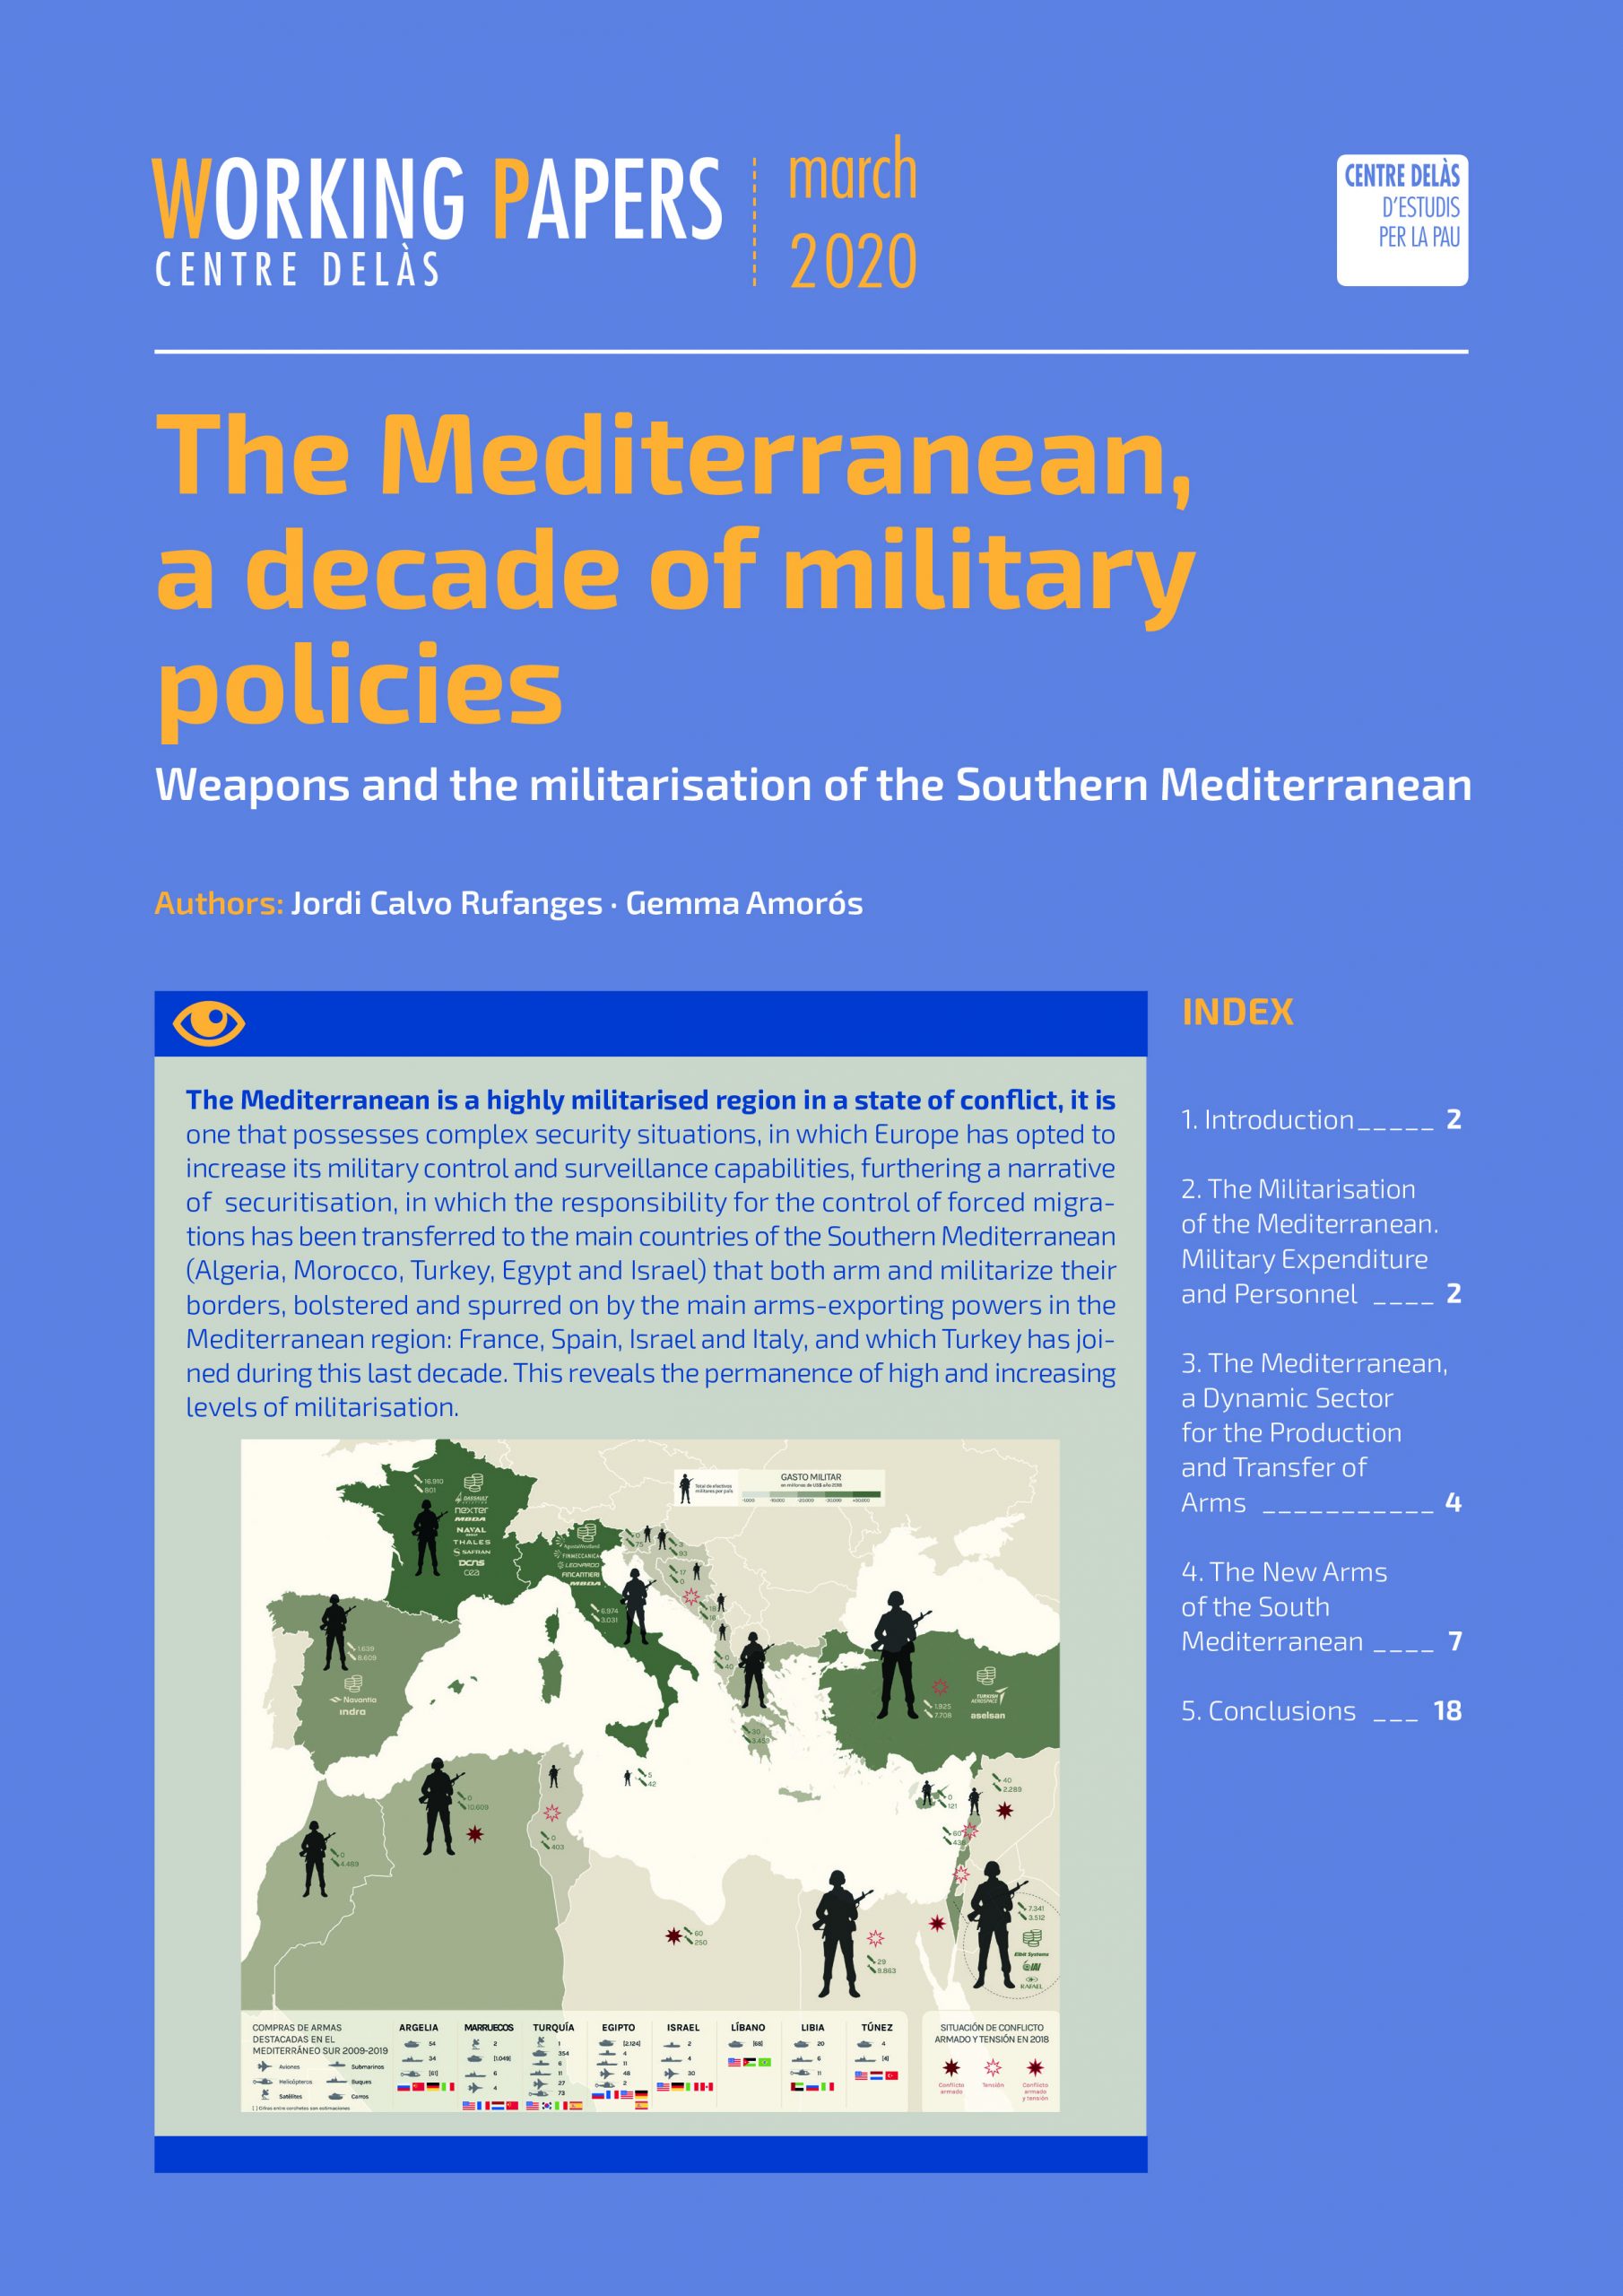 Working Paper “The Mediterranean, a decade of military policies. Weapons and the militarisation of the Southern Mediterranean”